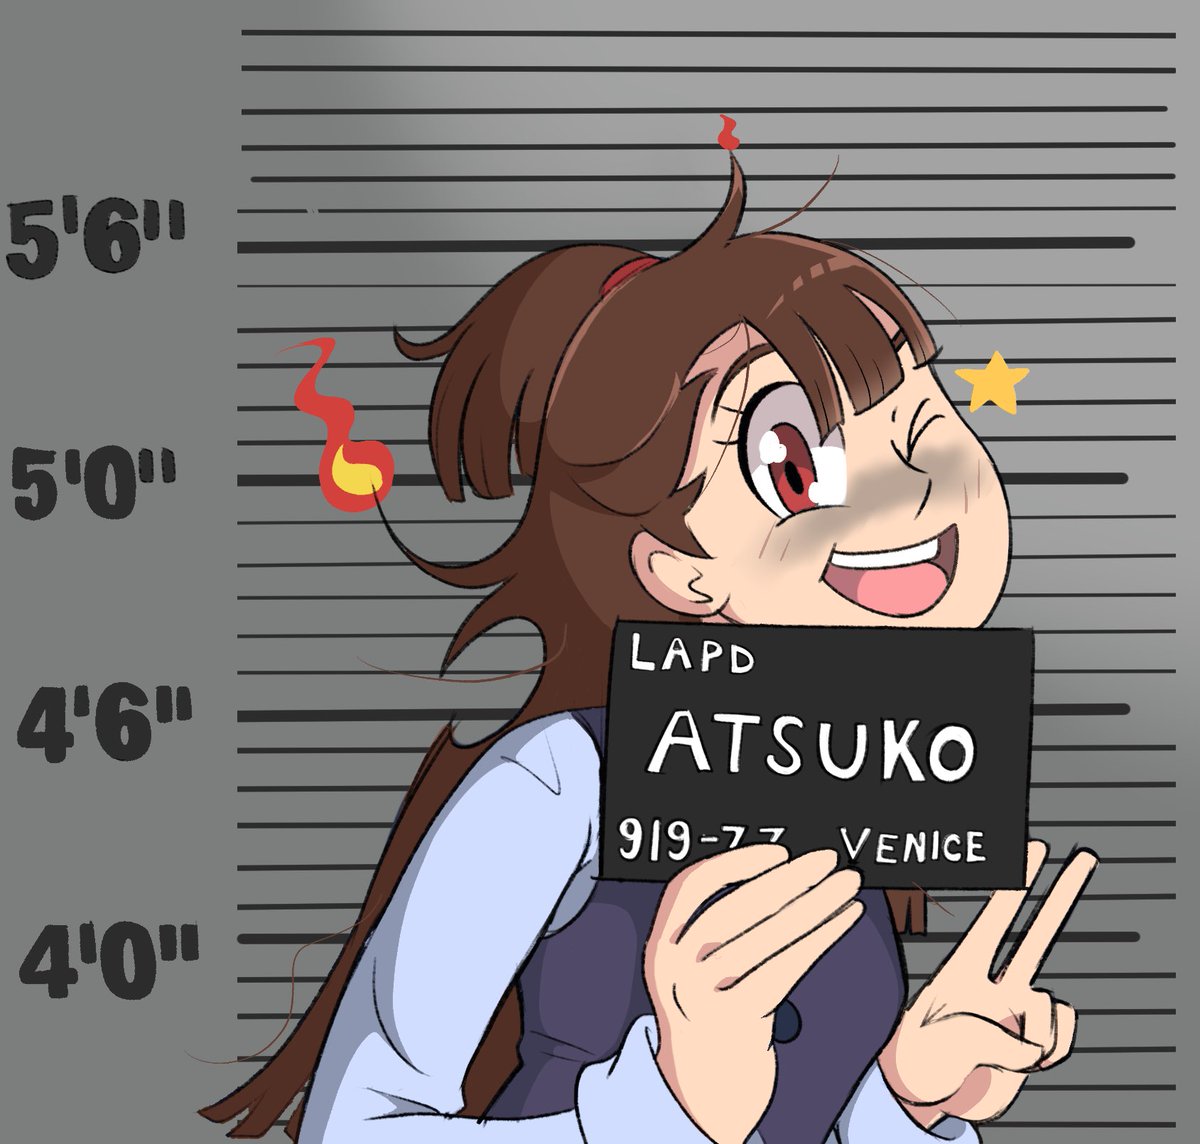 A complete mystery how they ended up in this situation #diakko #LWA_jp #littlewitchacademia